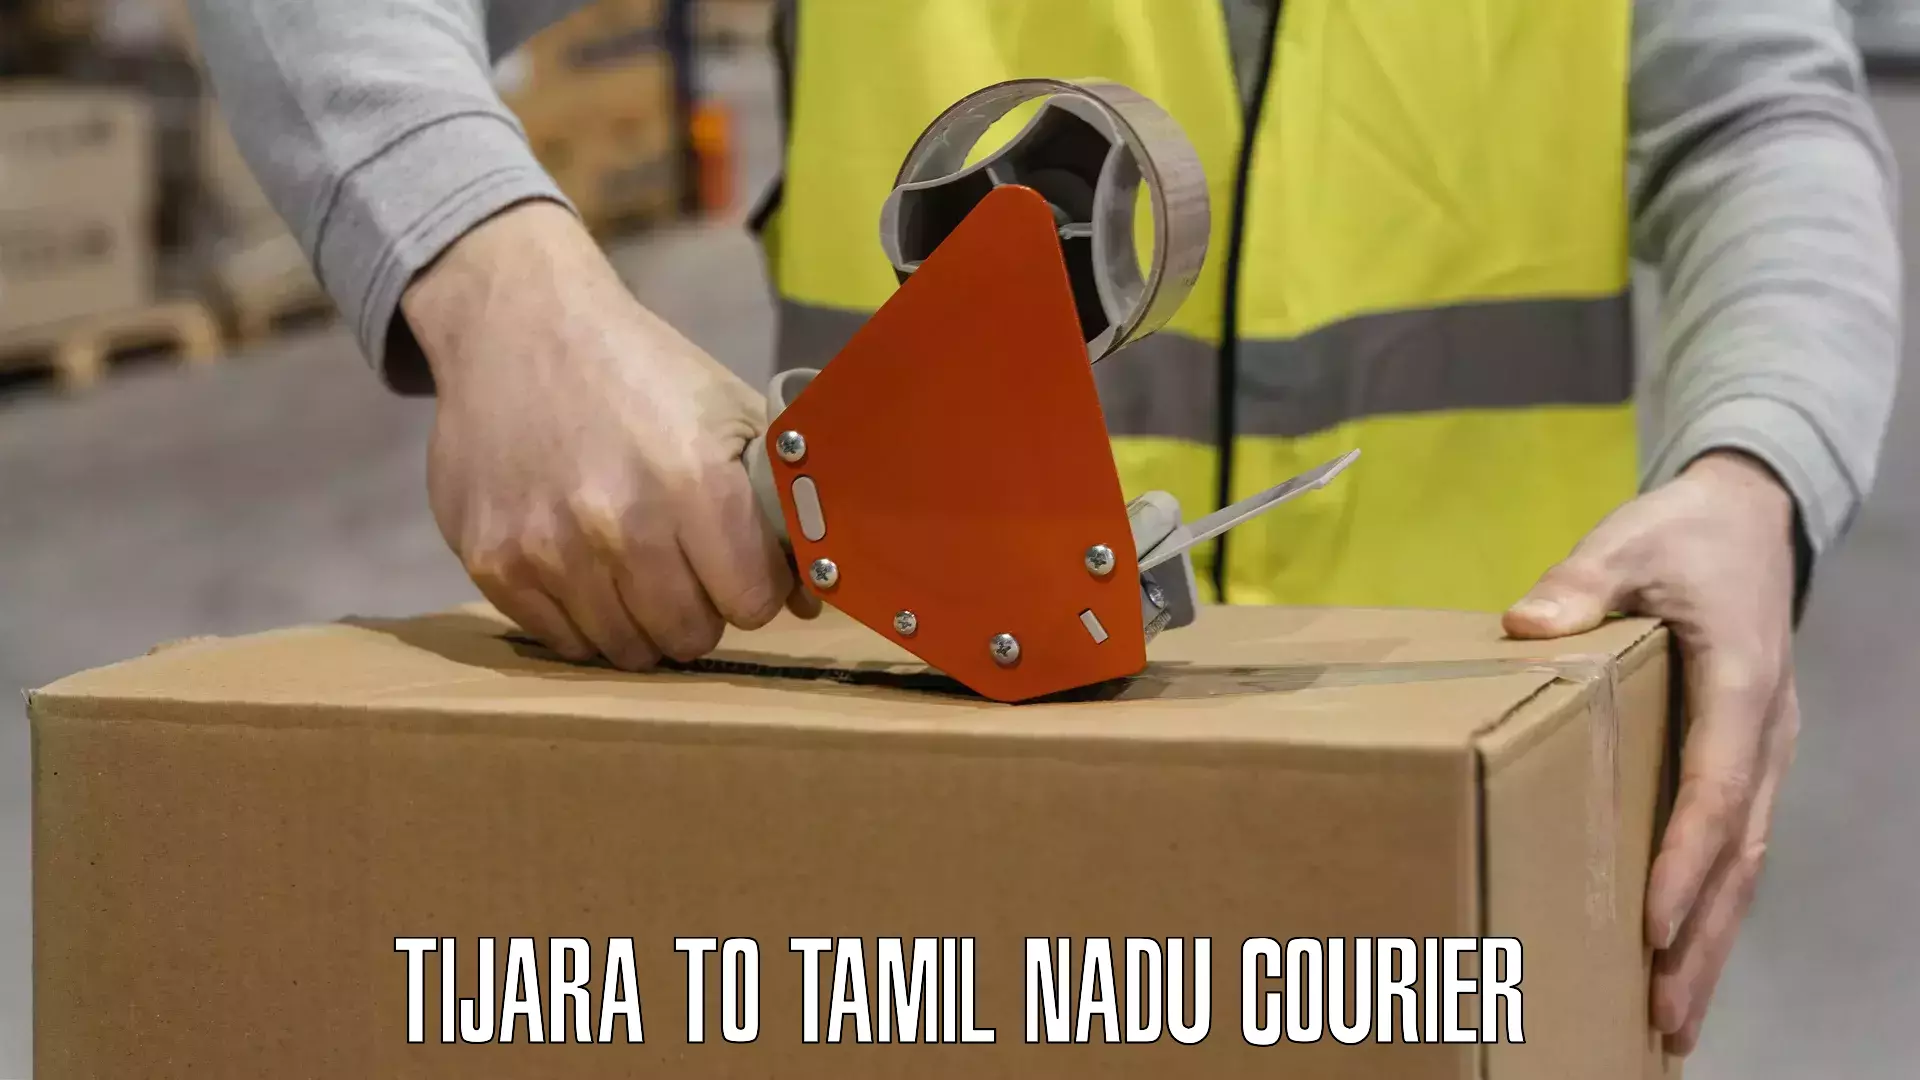 Reliable courier services Tijara to Tamil Nadu